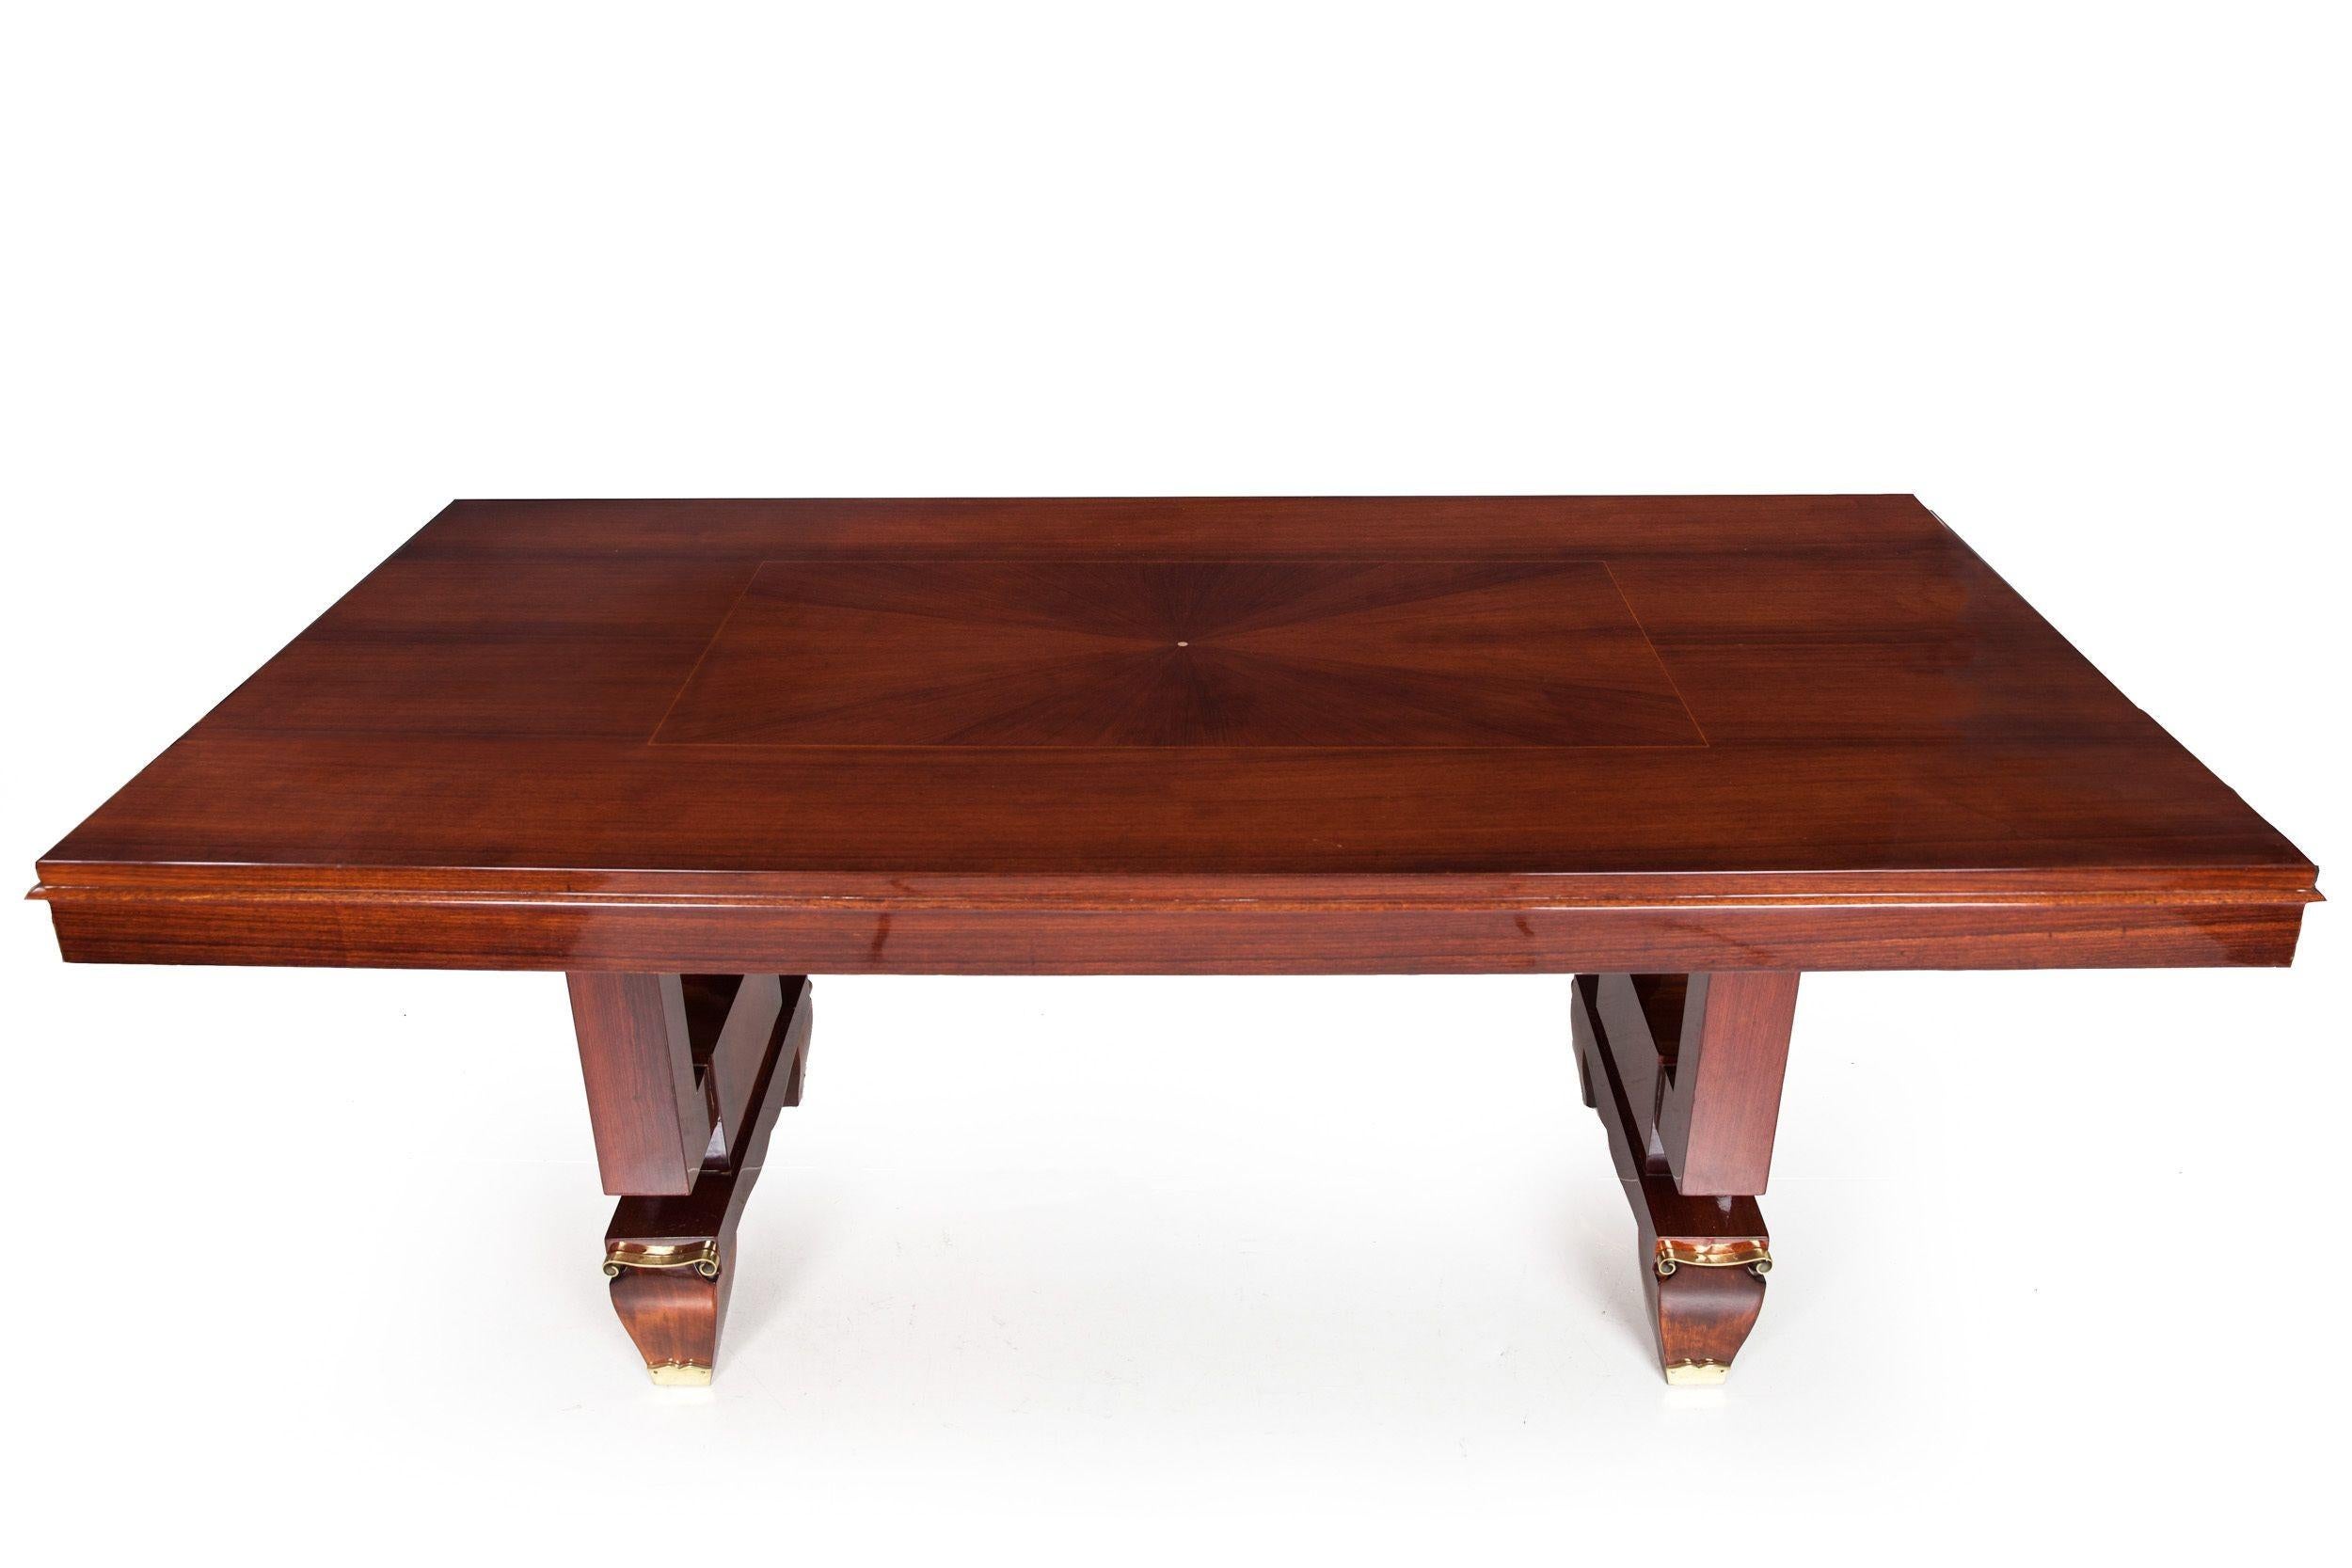 French Art Deco Inlaid Mother-of-Pearl Rosewood Dining Table, circa 1940s For Sale 13